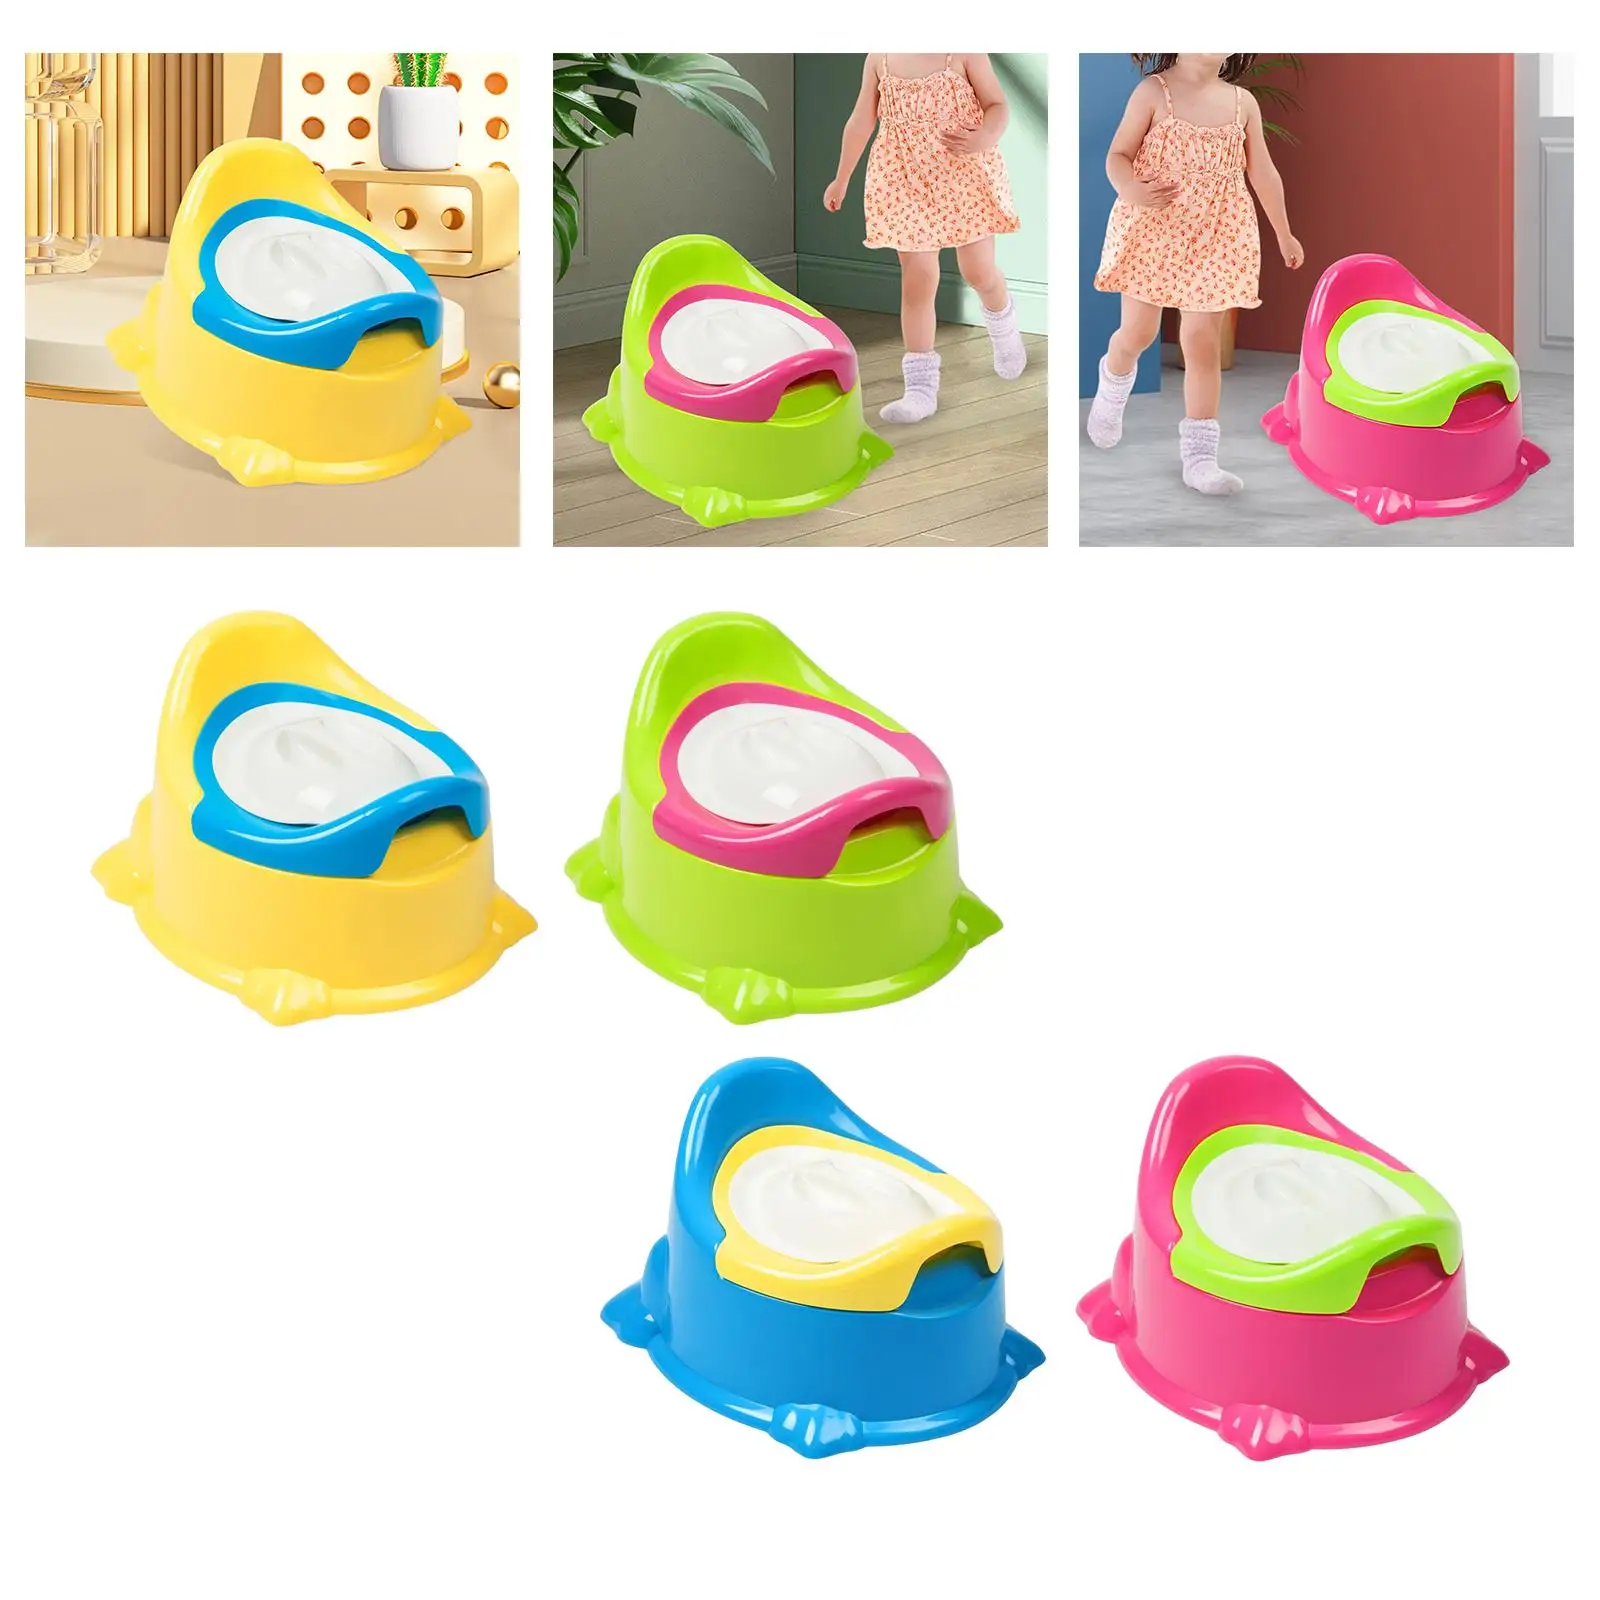 Child Potty Kids Training Toilet Seat Easy Clean Potty Trainer Toilet Chair Seat for Babies 6-12 Month Camping